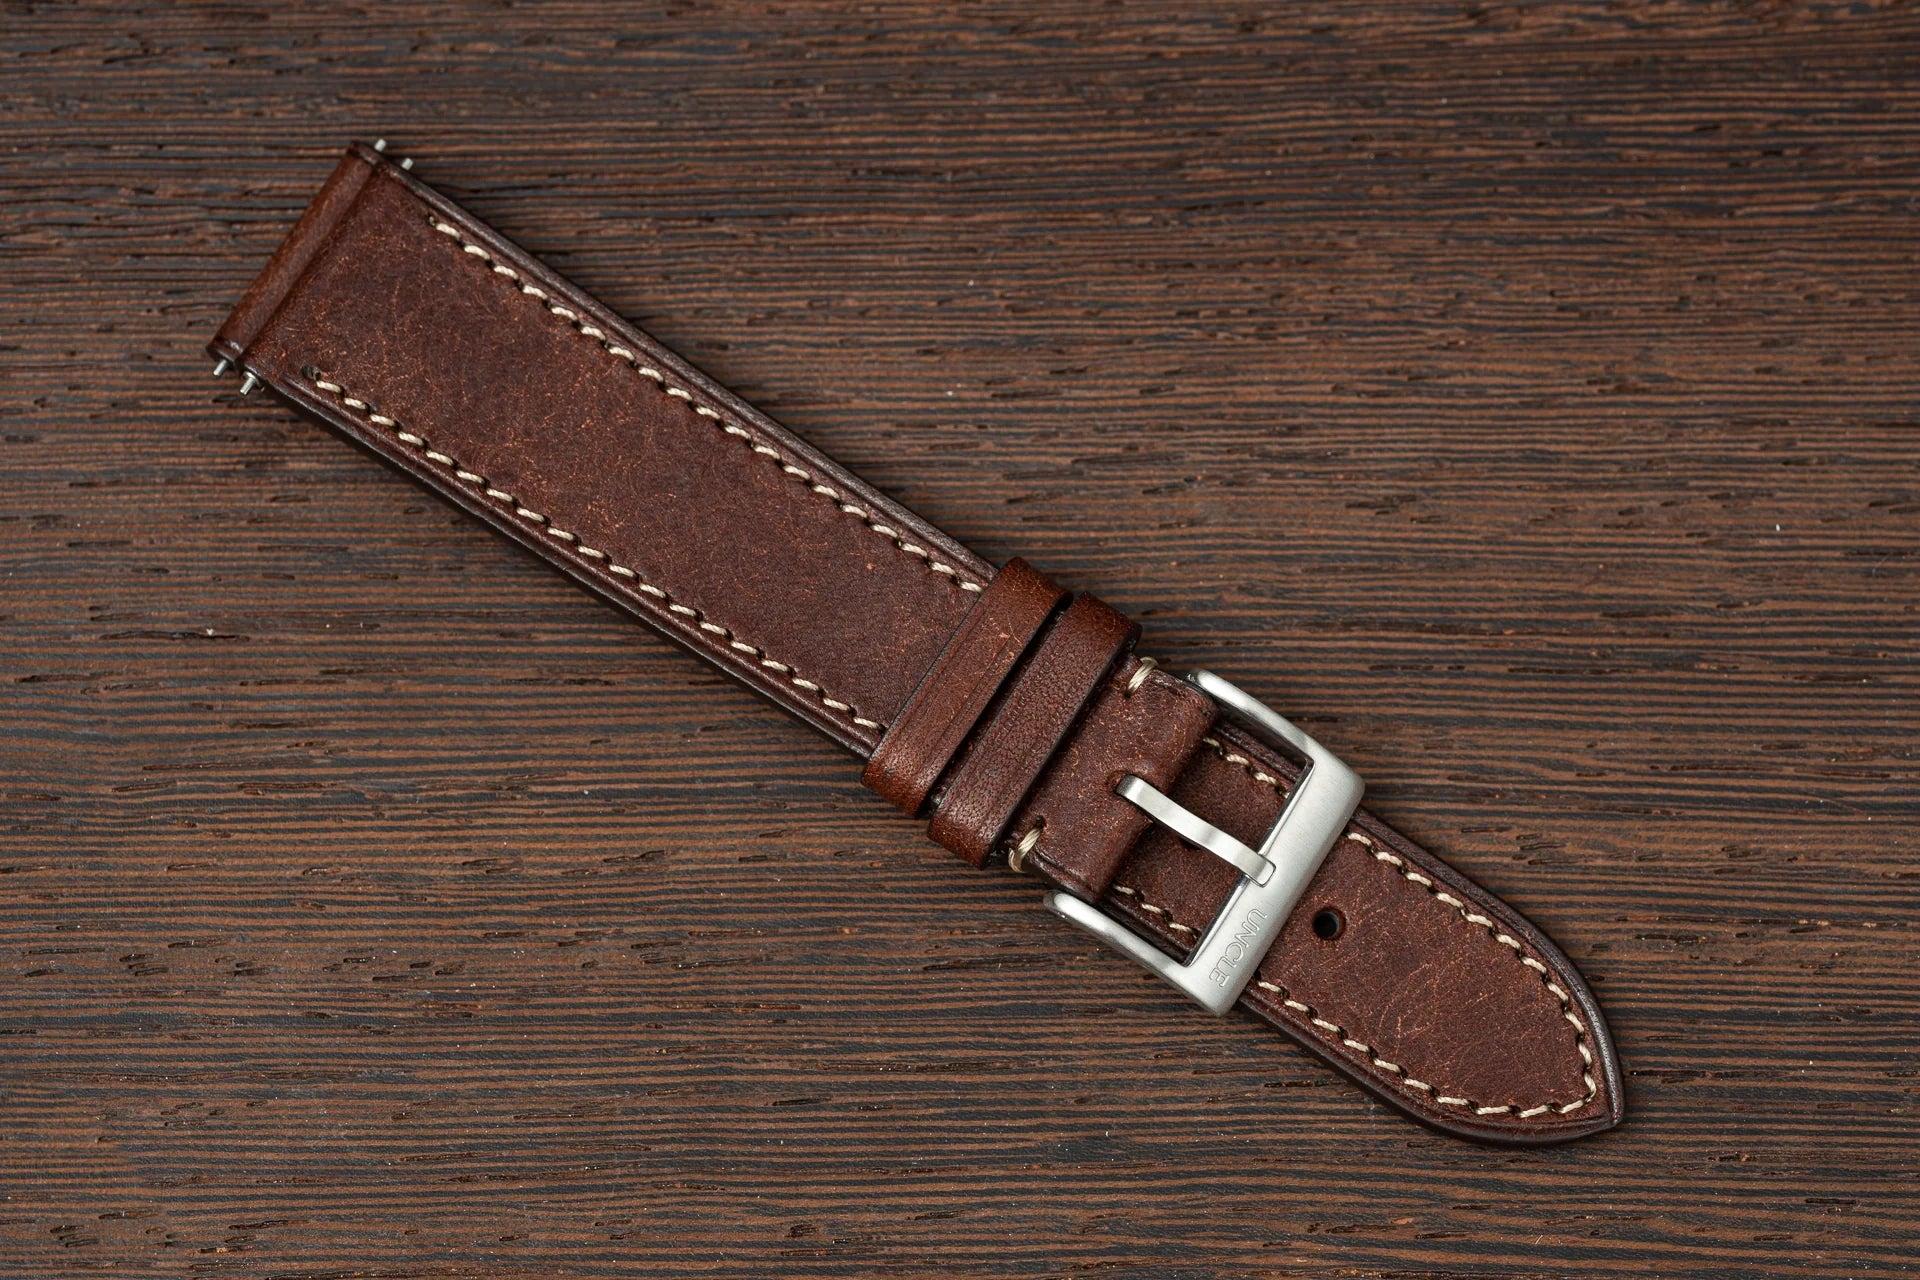 Classic Cowhide Leather Strap - Walnut